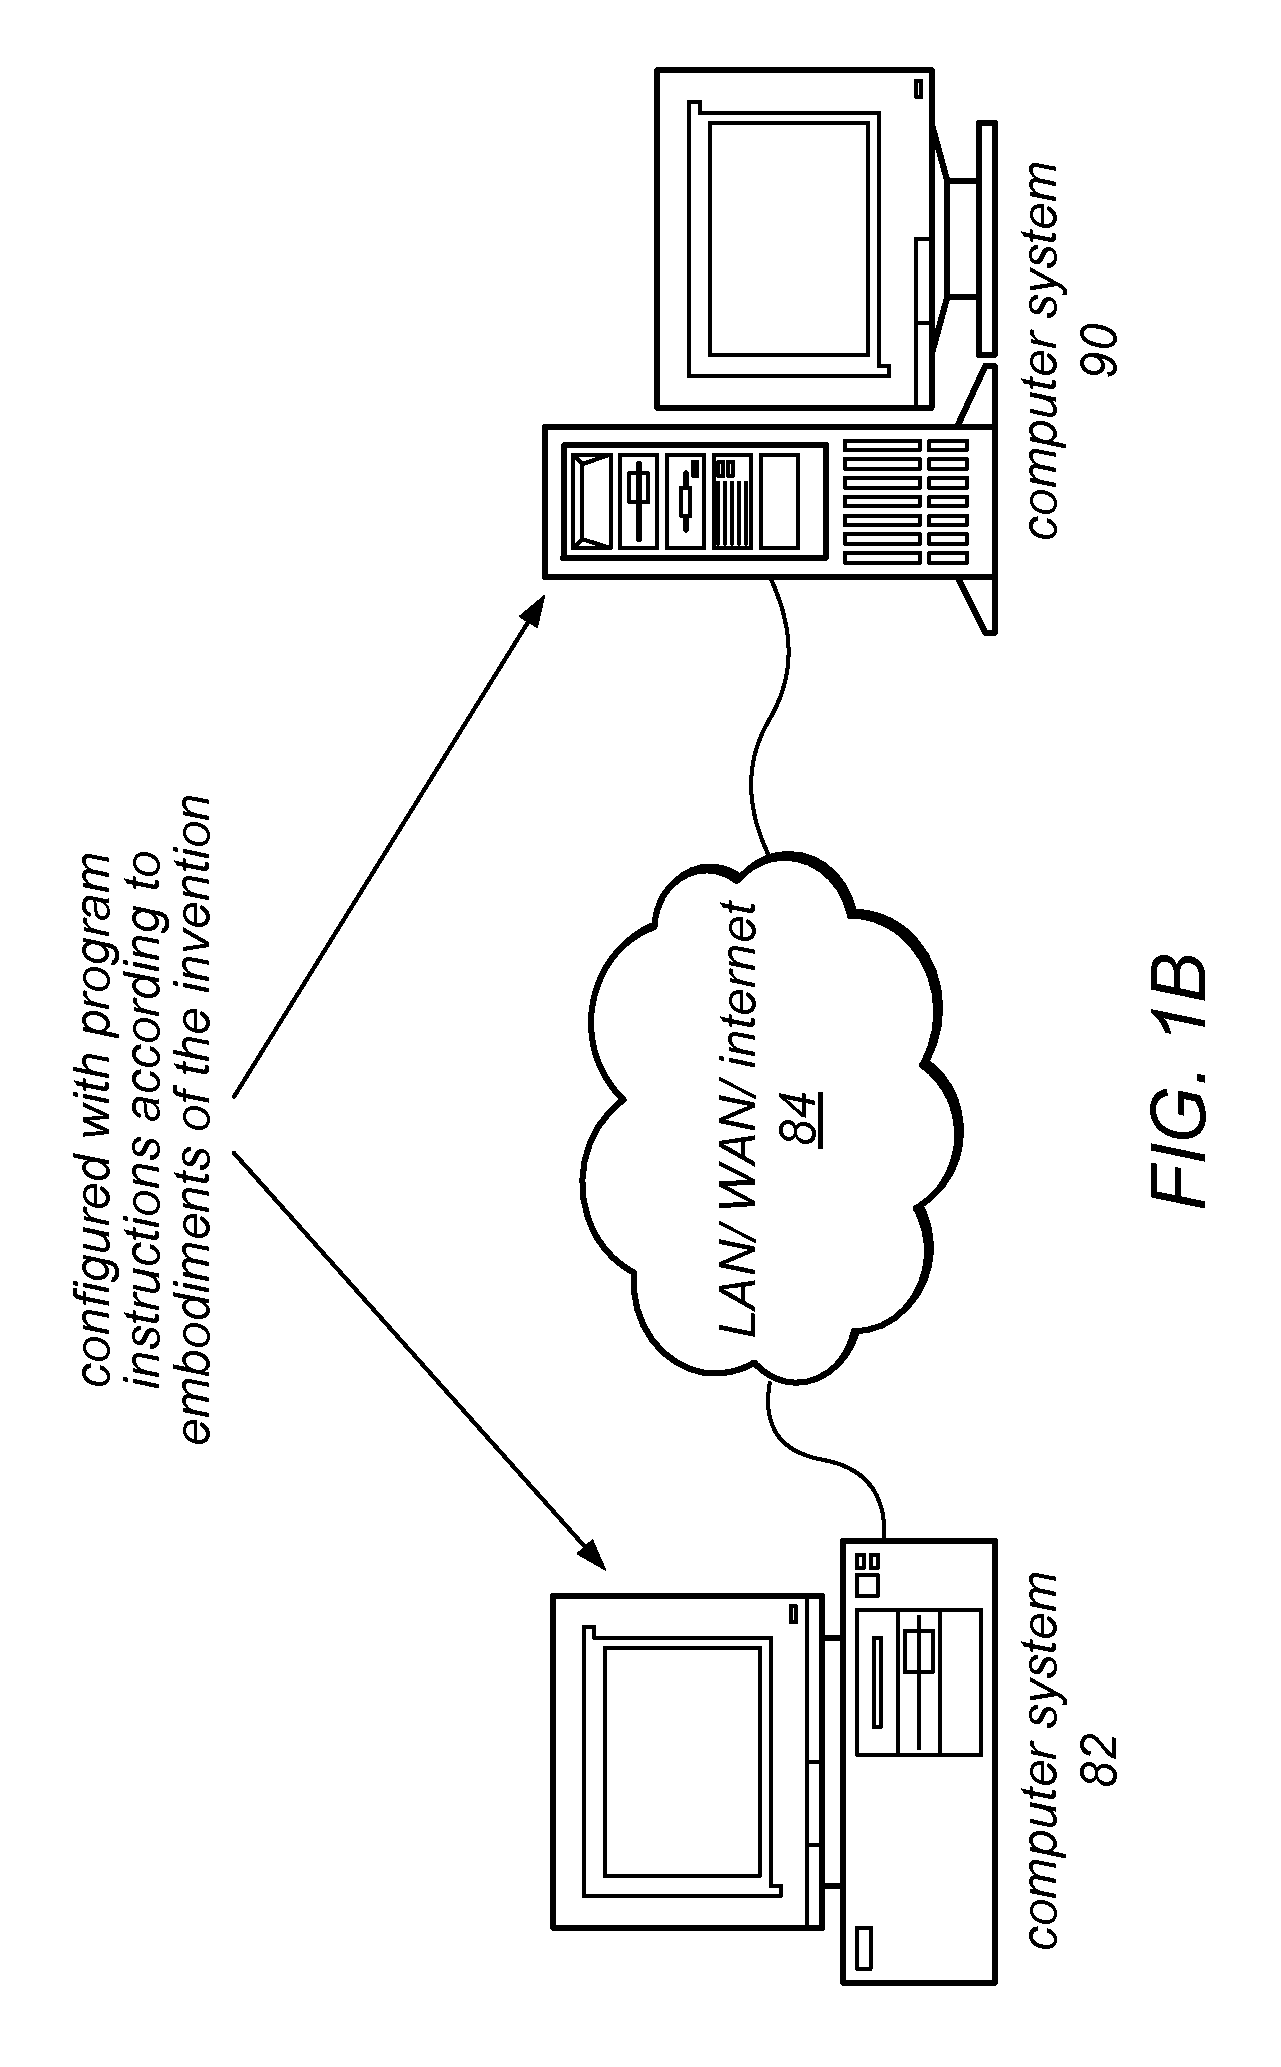 Developing programs for hardware implementation in a graphical specification and constraint language Via iterative estimation of performance or resource utilization